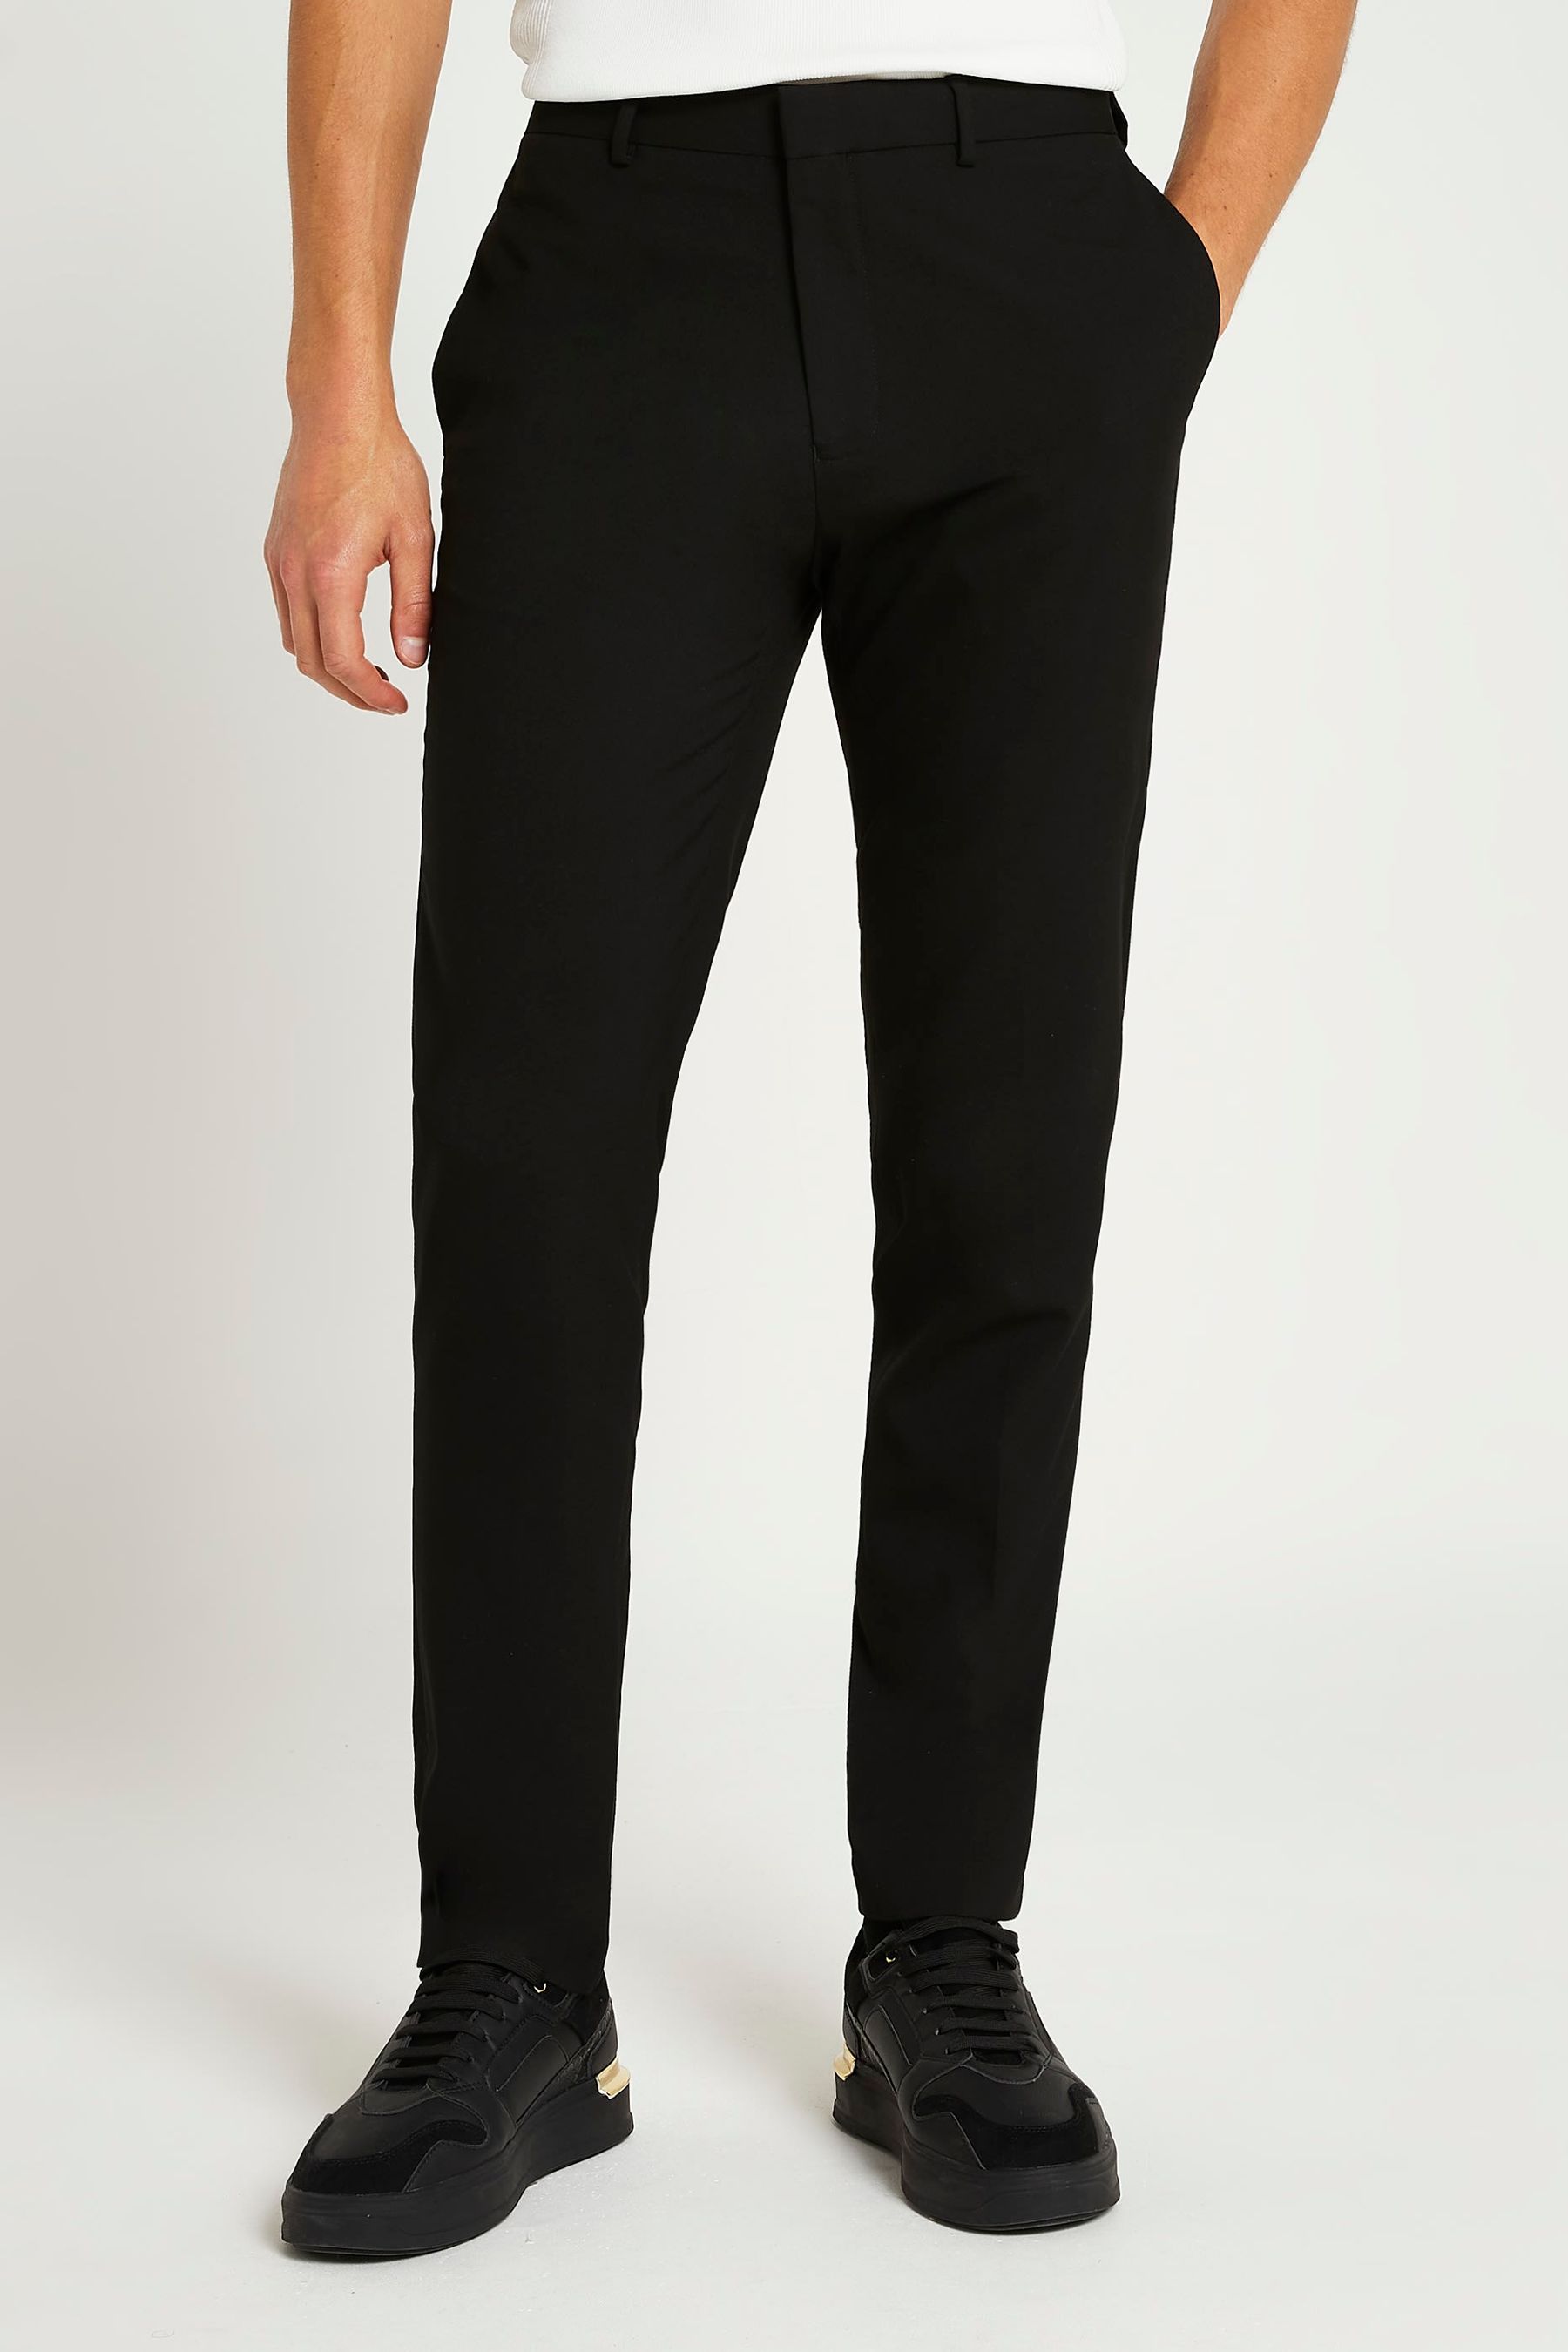 Buy River Island Sloane Pocket Black Trousers from the Next UK online shop